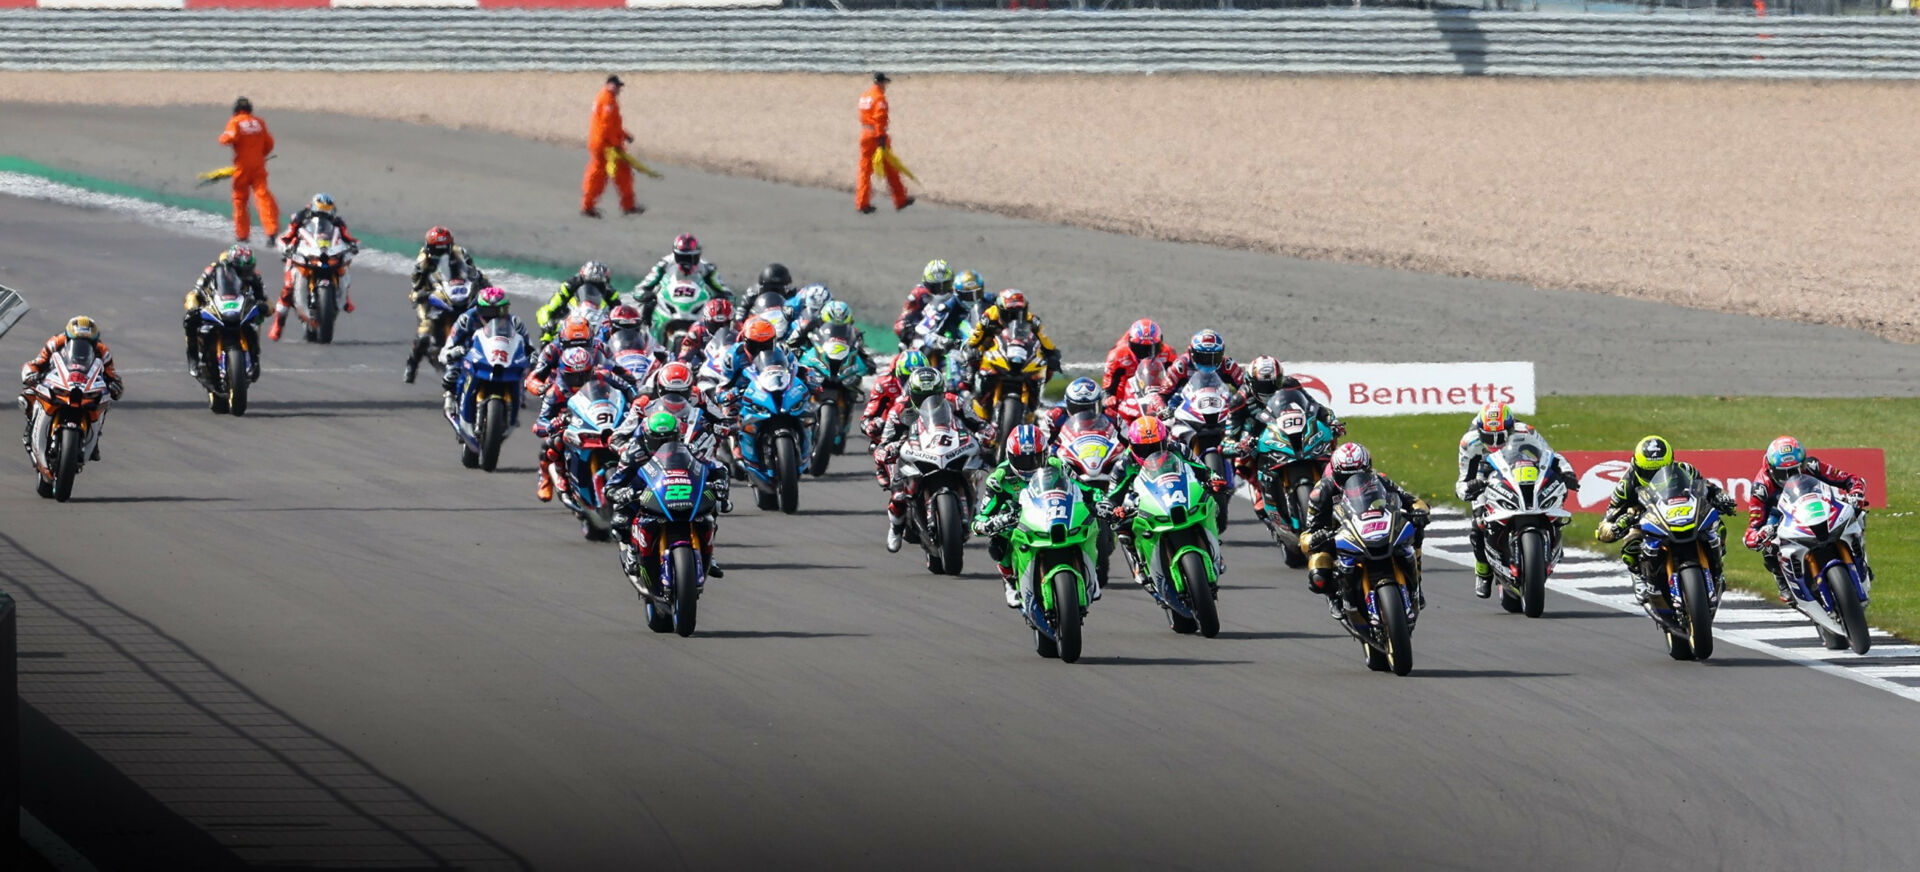 The start of a British Superbike race at Silverstone during the 2022 season. Photo courtesy MSVR.